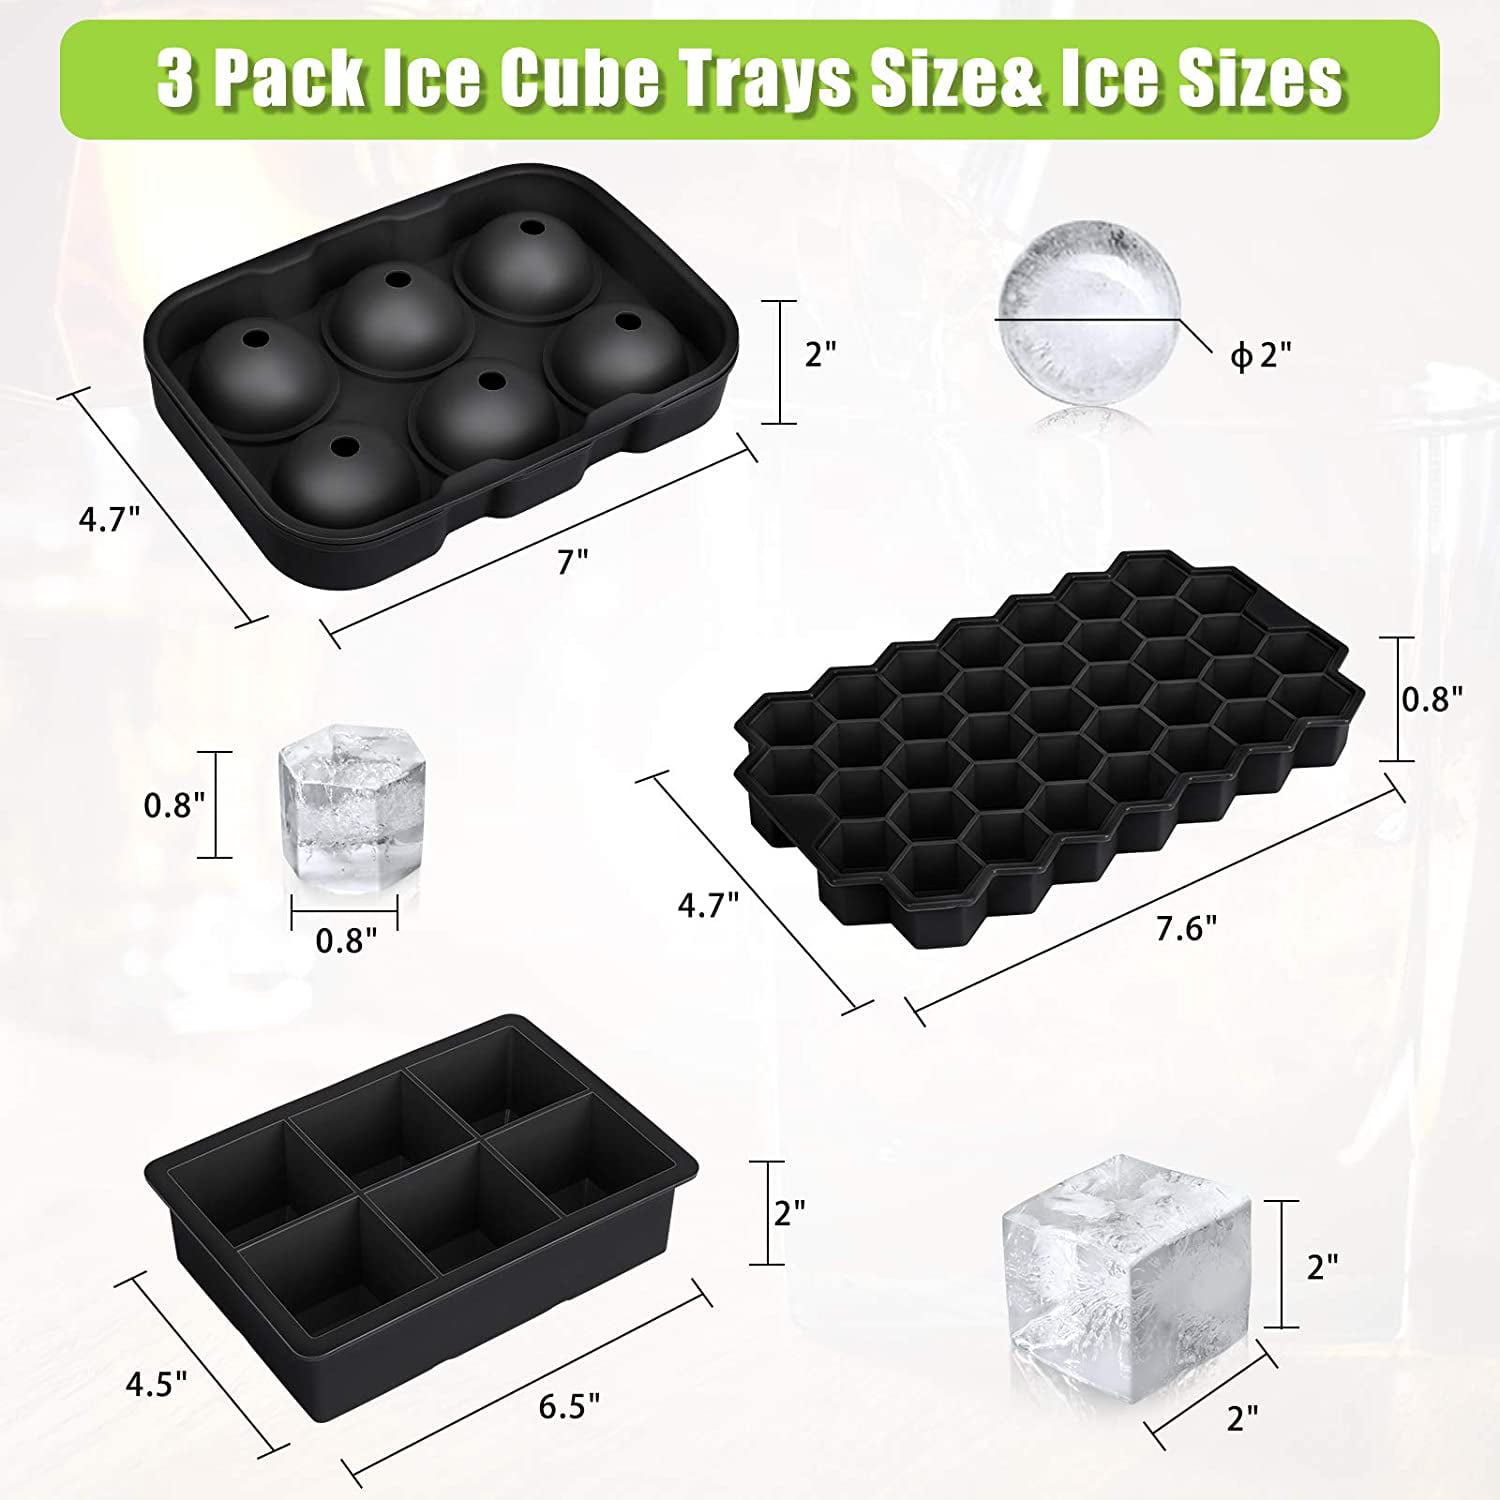 SKYCARPER Silicone Ice Cube Tray - Honeycomb Shaped Flexible Ice Trays with Covers - BPA Free Silicone Ice Tray Molds with Removable Lid, Size: 1PC(Honeycomb)